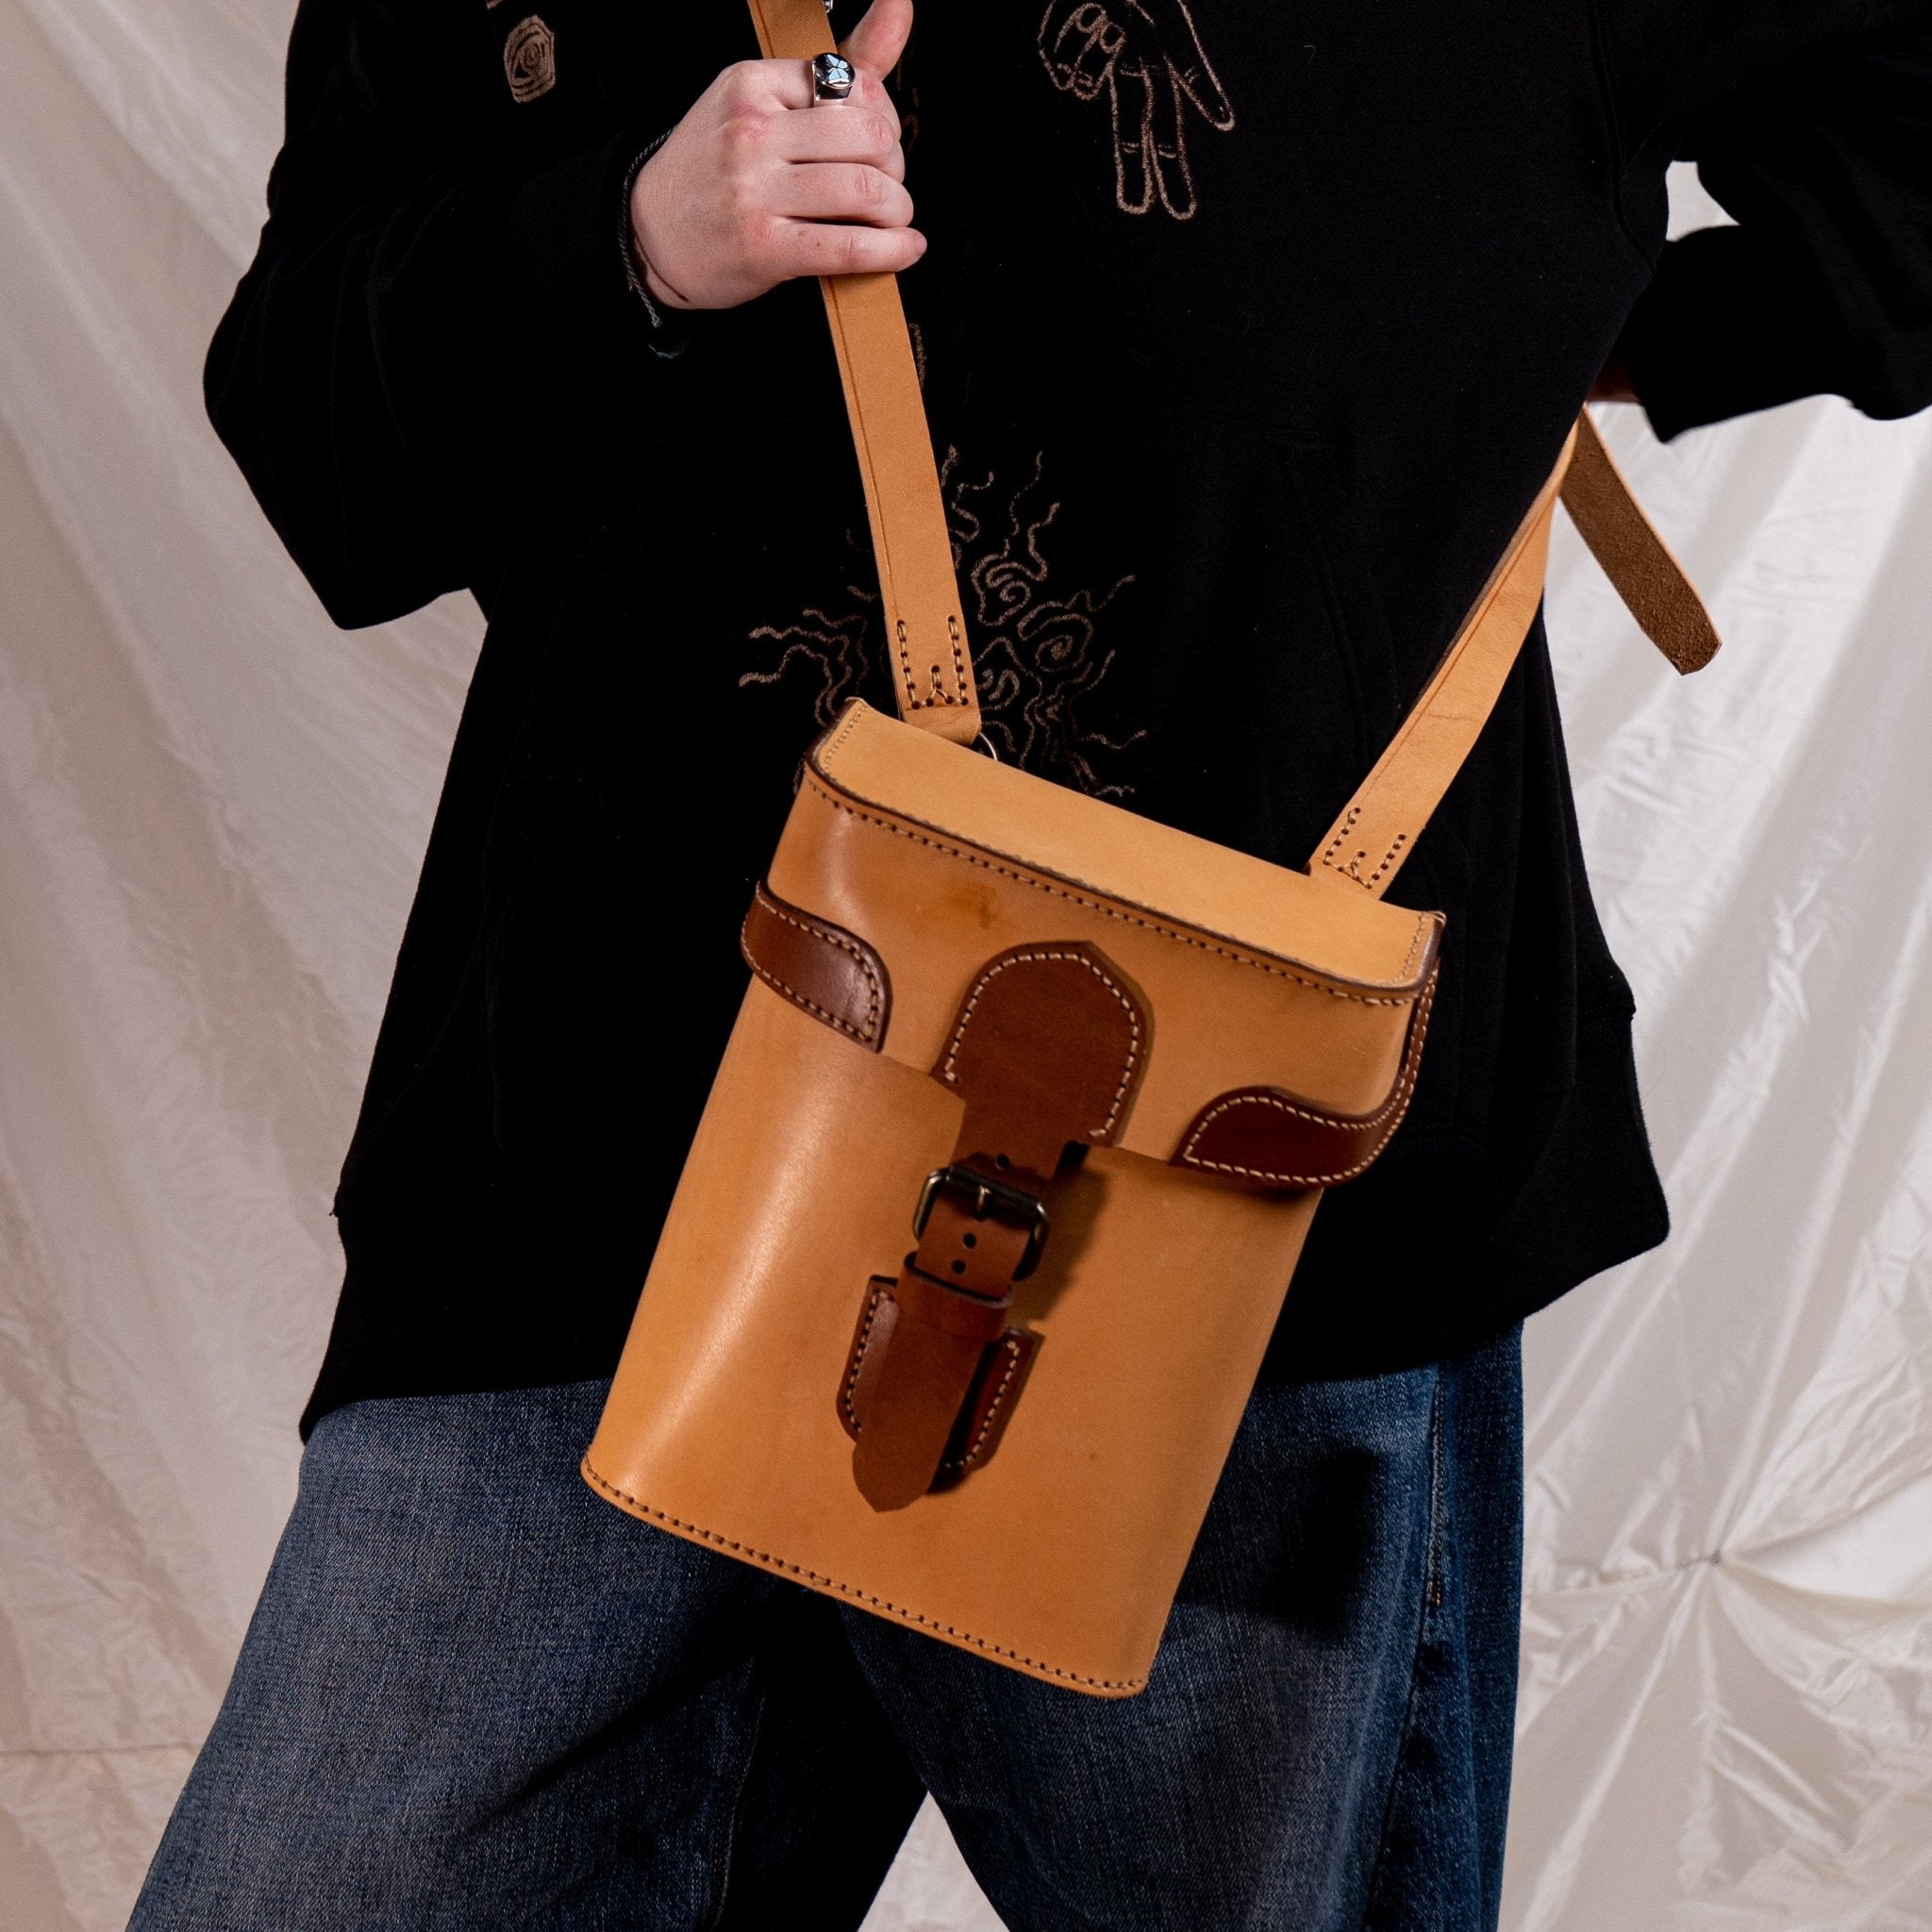 PDF Pattern and Instructional Video for Perry Crossbody Bag - Vasile and Pavel Leather Patterns